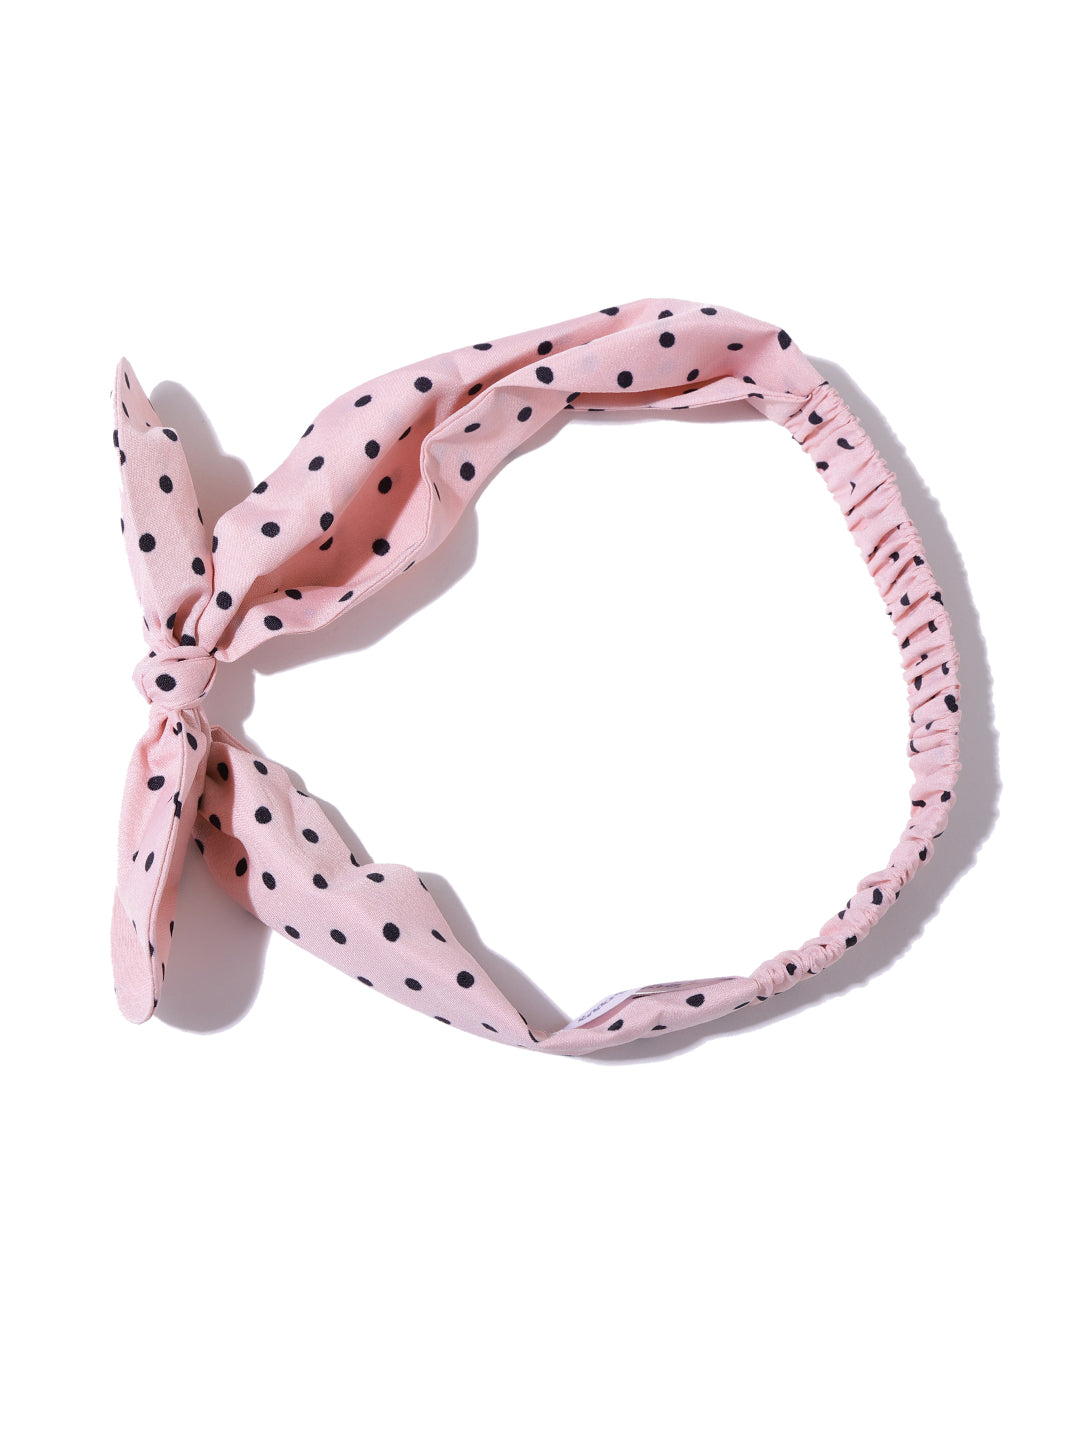 Blueberry black dotted pink bunny ear shape hair band